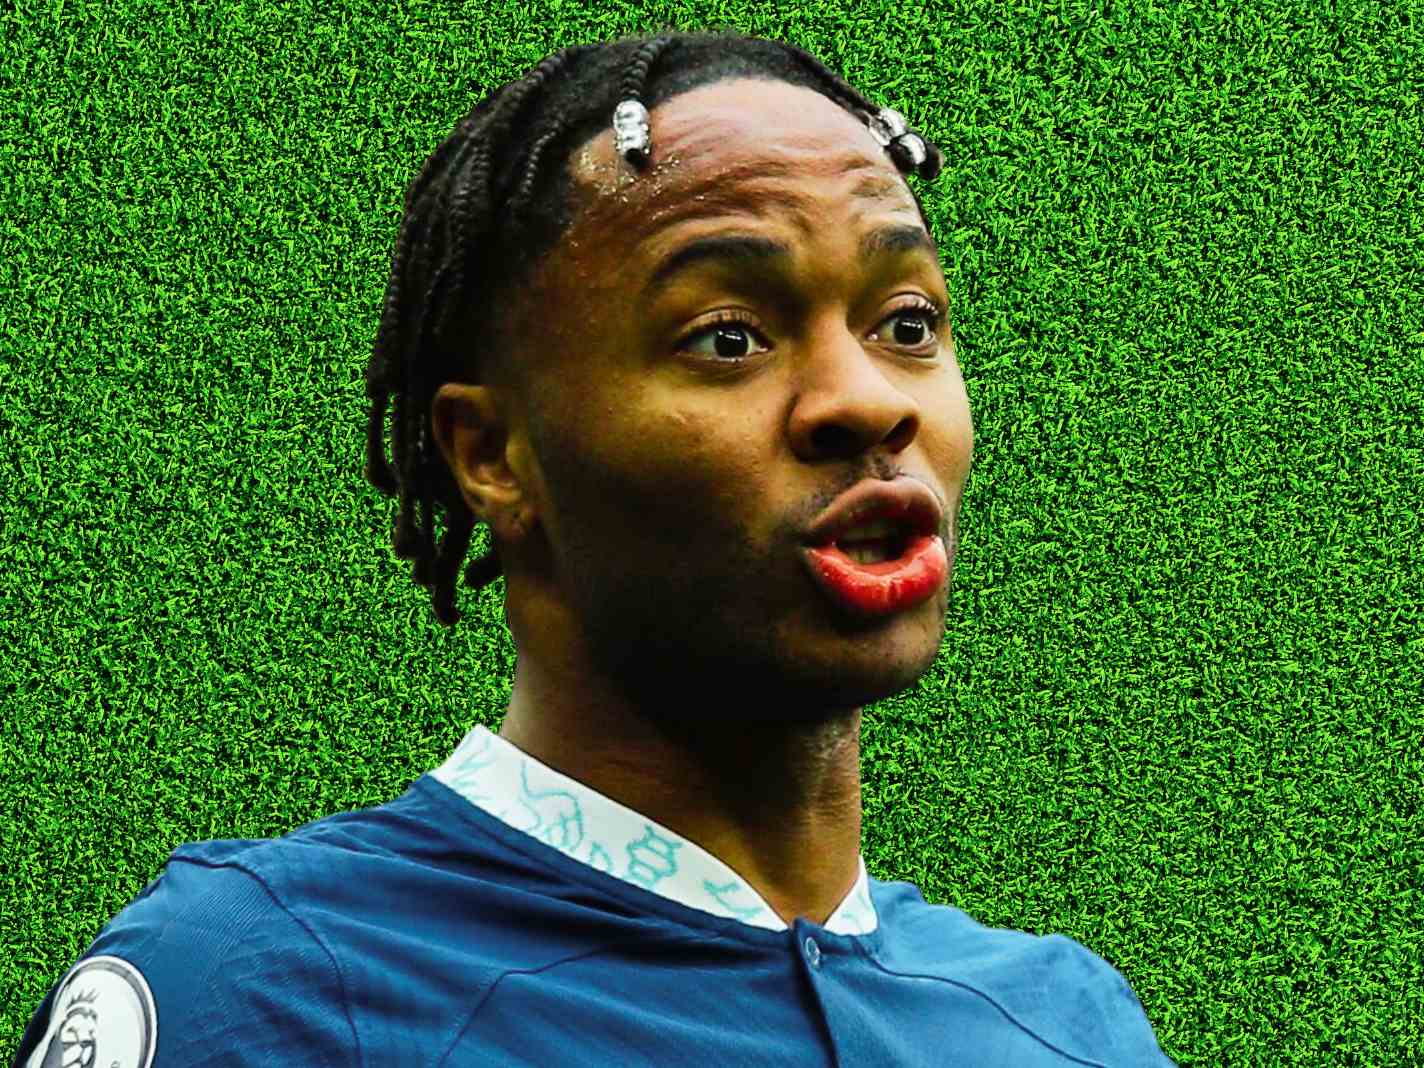 From Winger to Educator: How Raheem Sterling is Giving Back to His Community